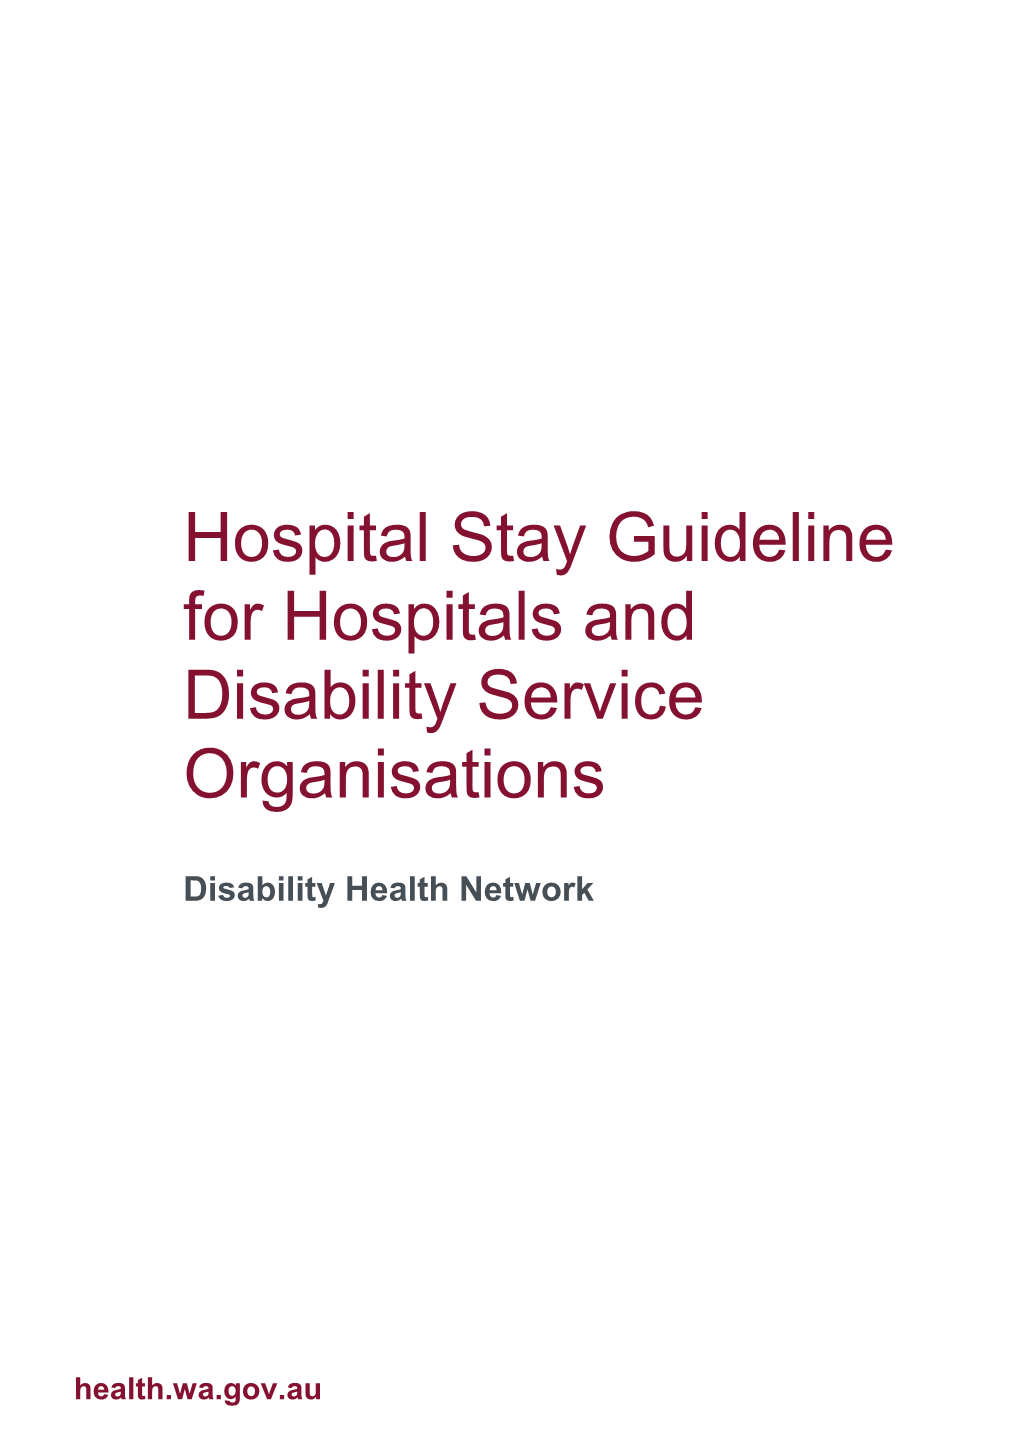 Hospital Stay Guideline for Hospitals and Disability Service Organisations